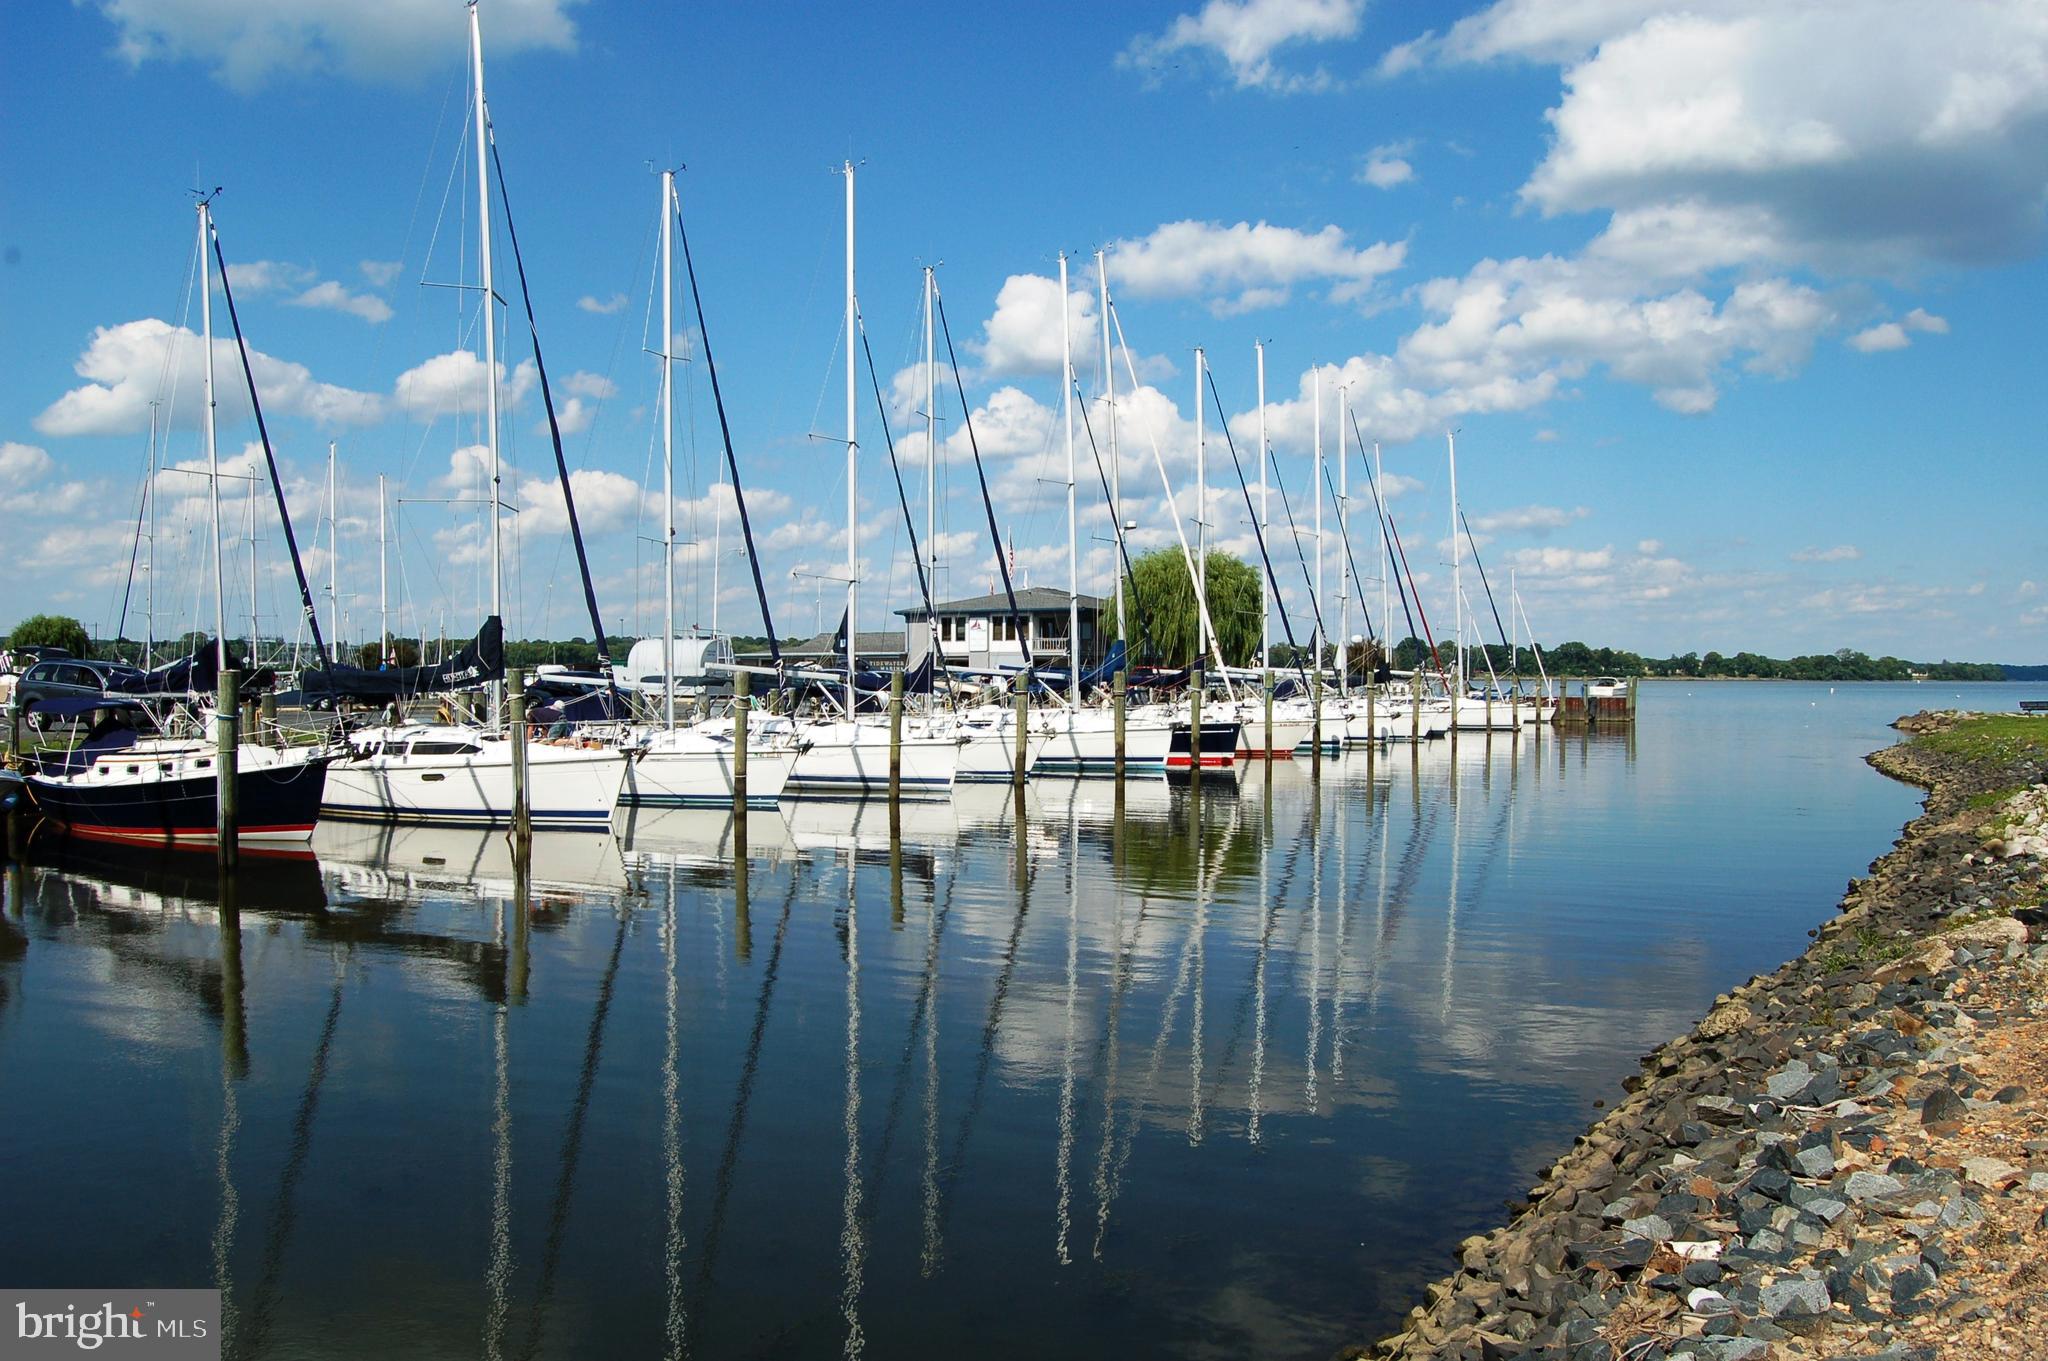 a view of water with boats and trees in the background